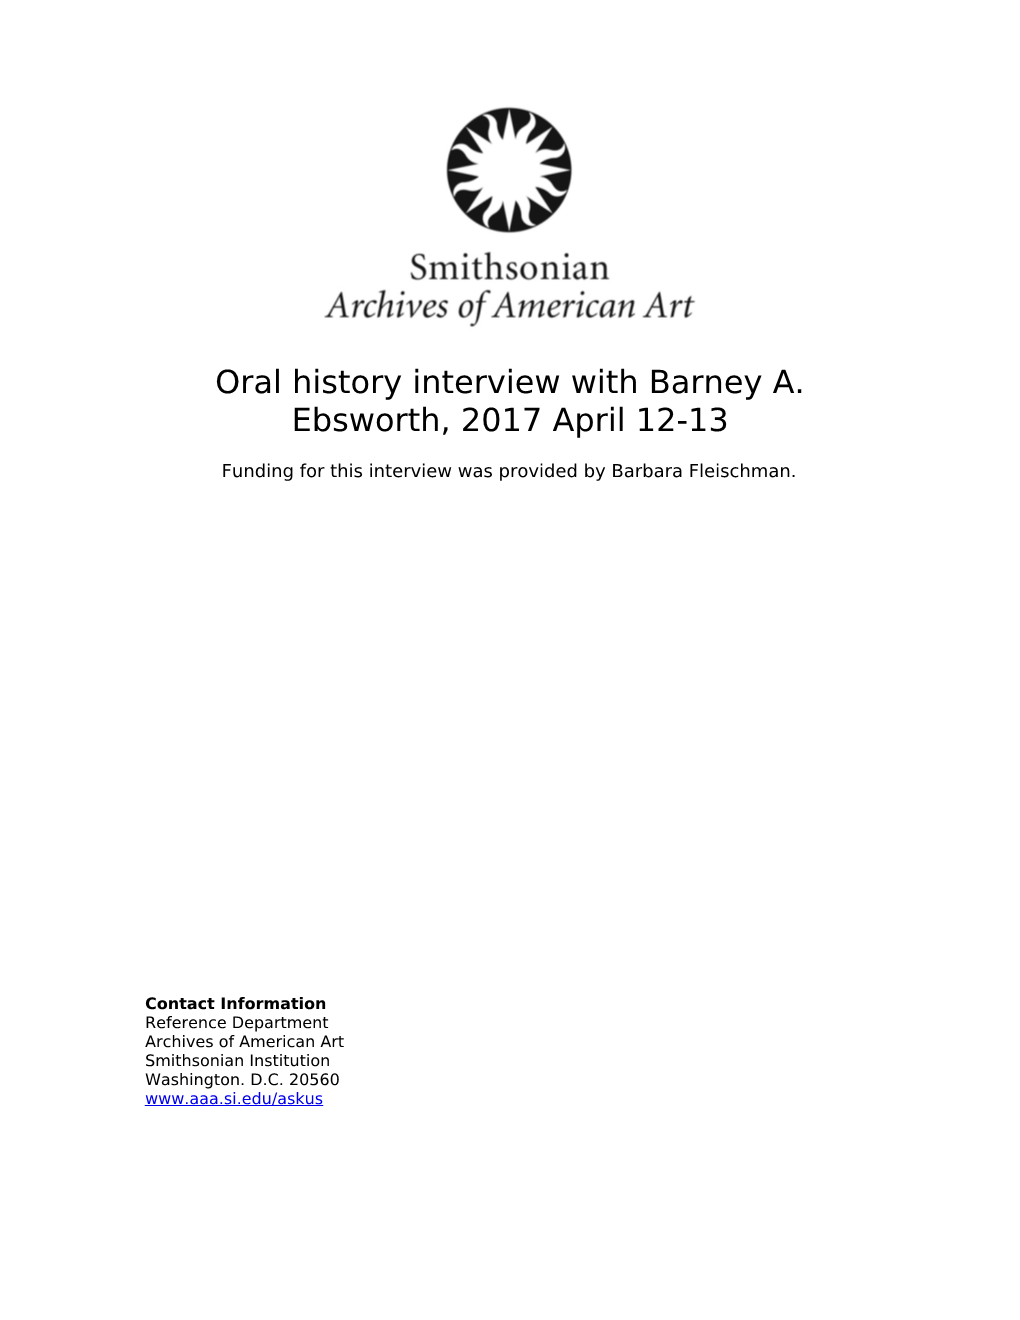 Oral History Interview with Barney A. Ebsworth, 2017 April 12-13